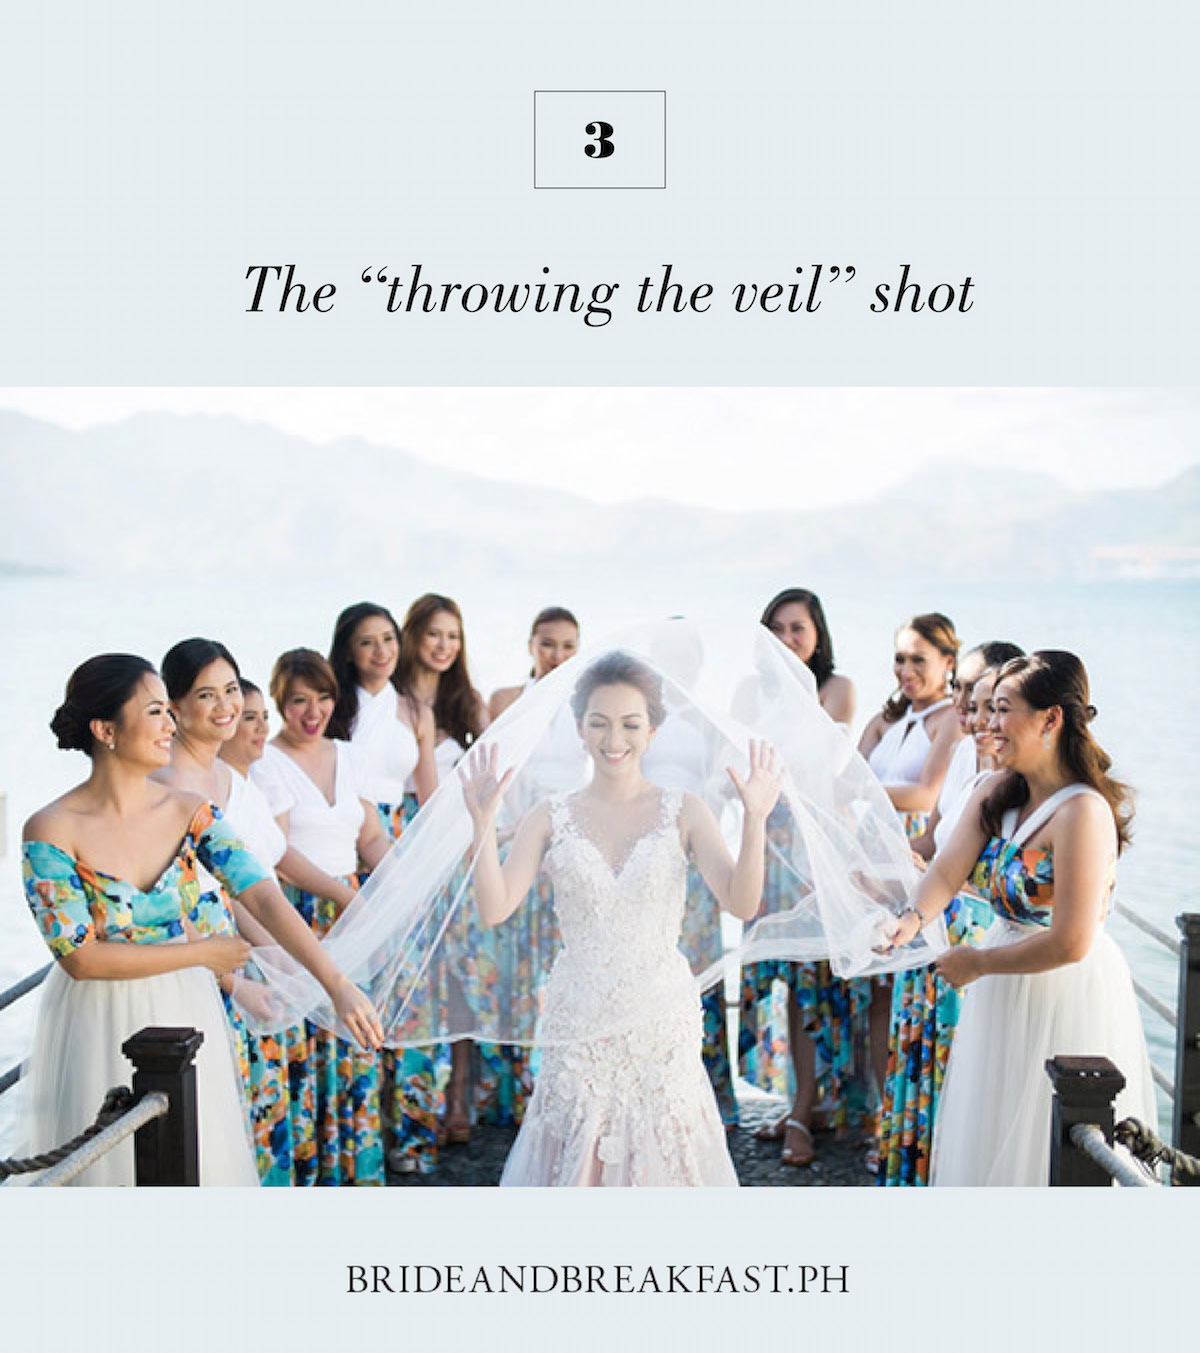 3. The "throwing the veil" shot